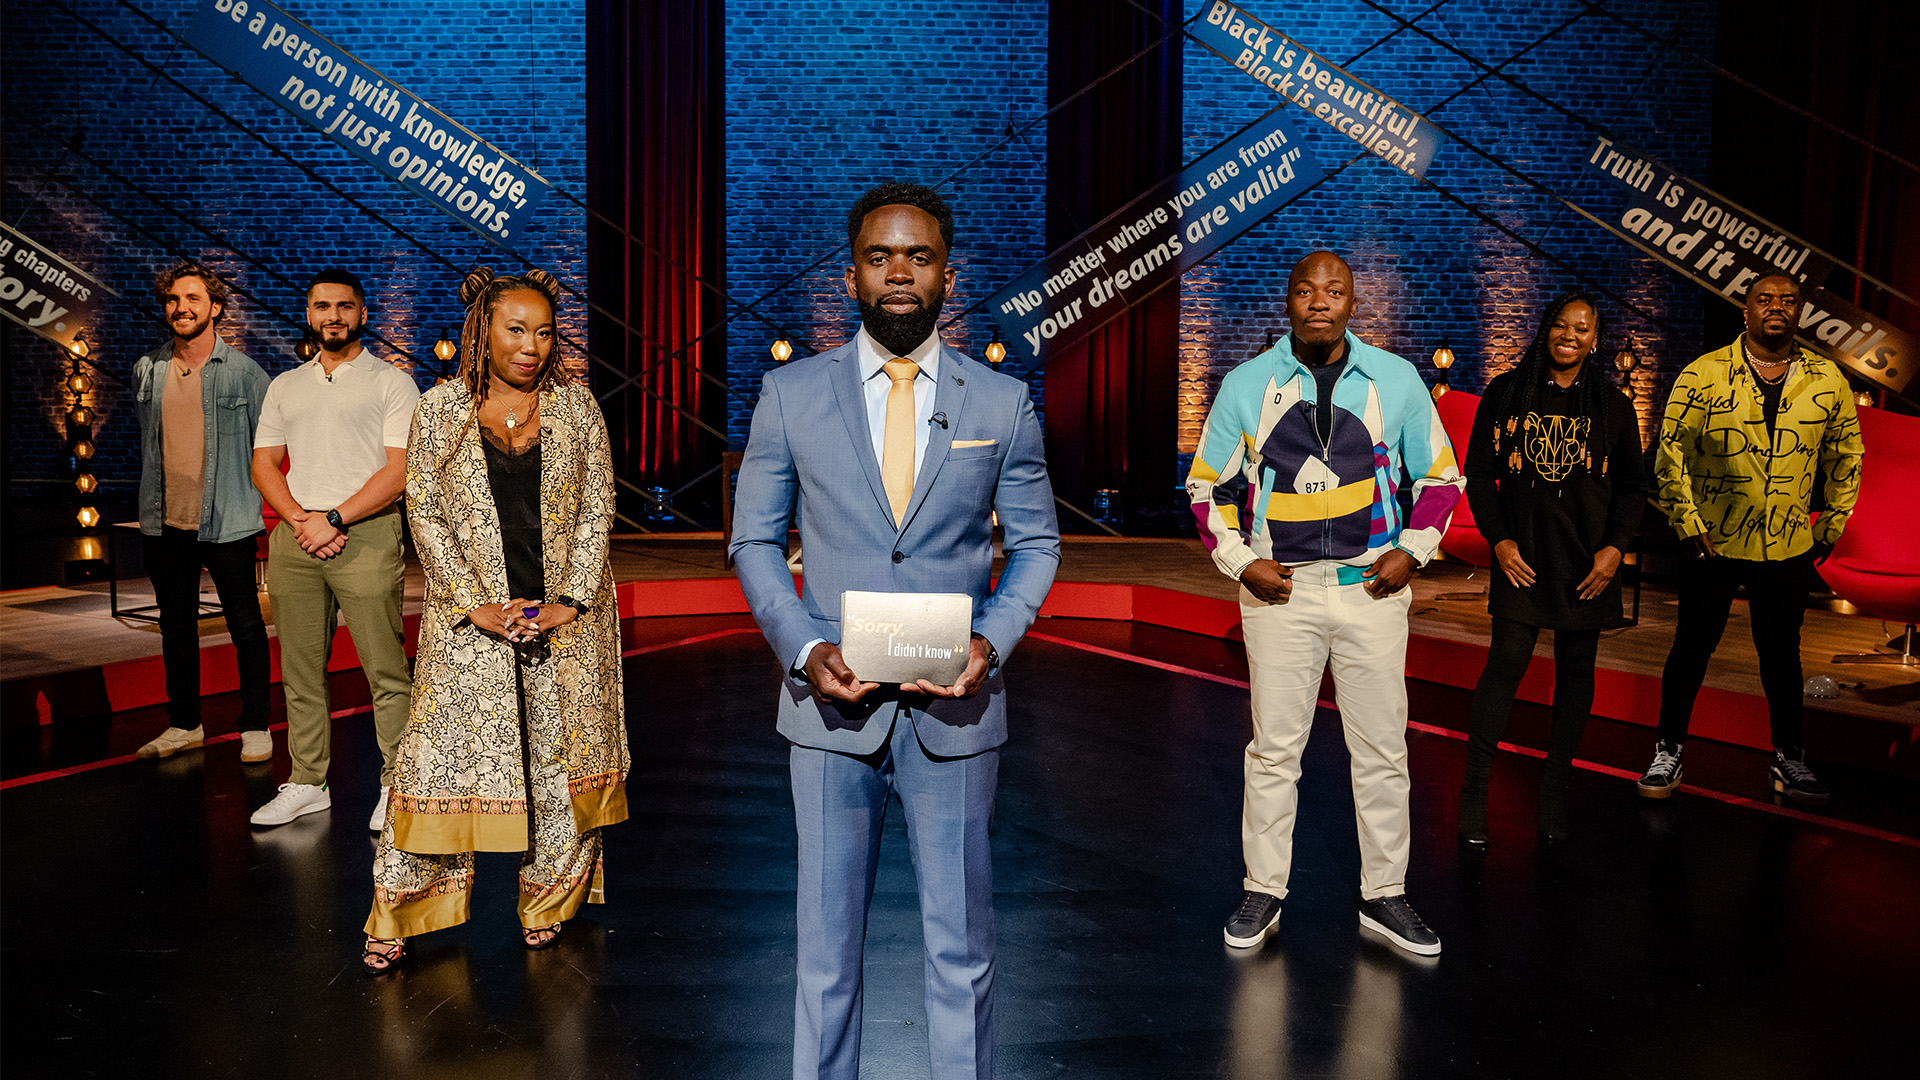 ITV panel show Sorry, I Didn't Know - featuring host Jimmy Akingbola and team captains Chizzy Akudolu and Eddie Kadi